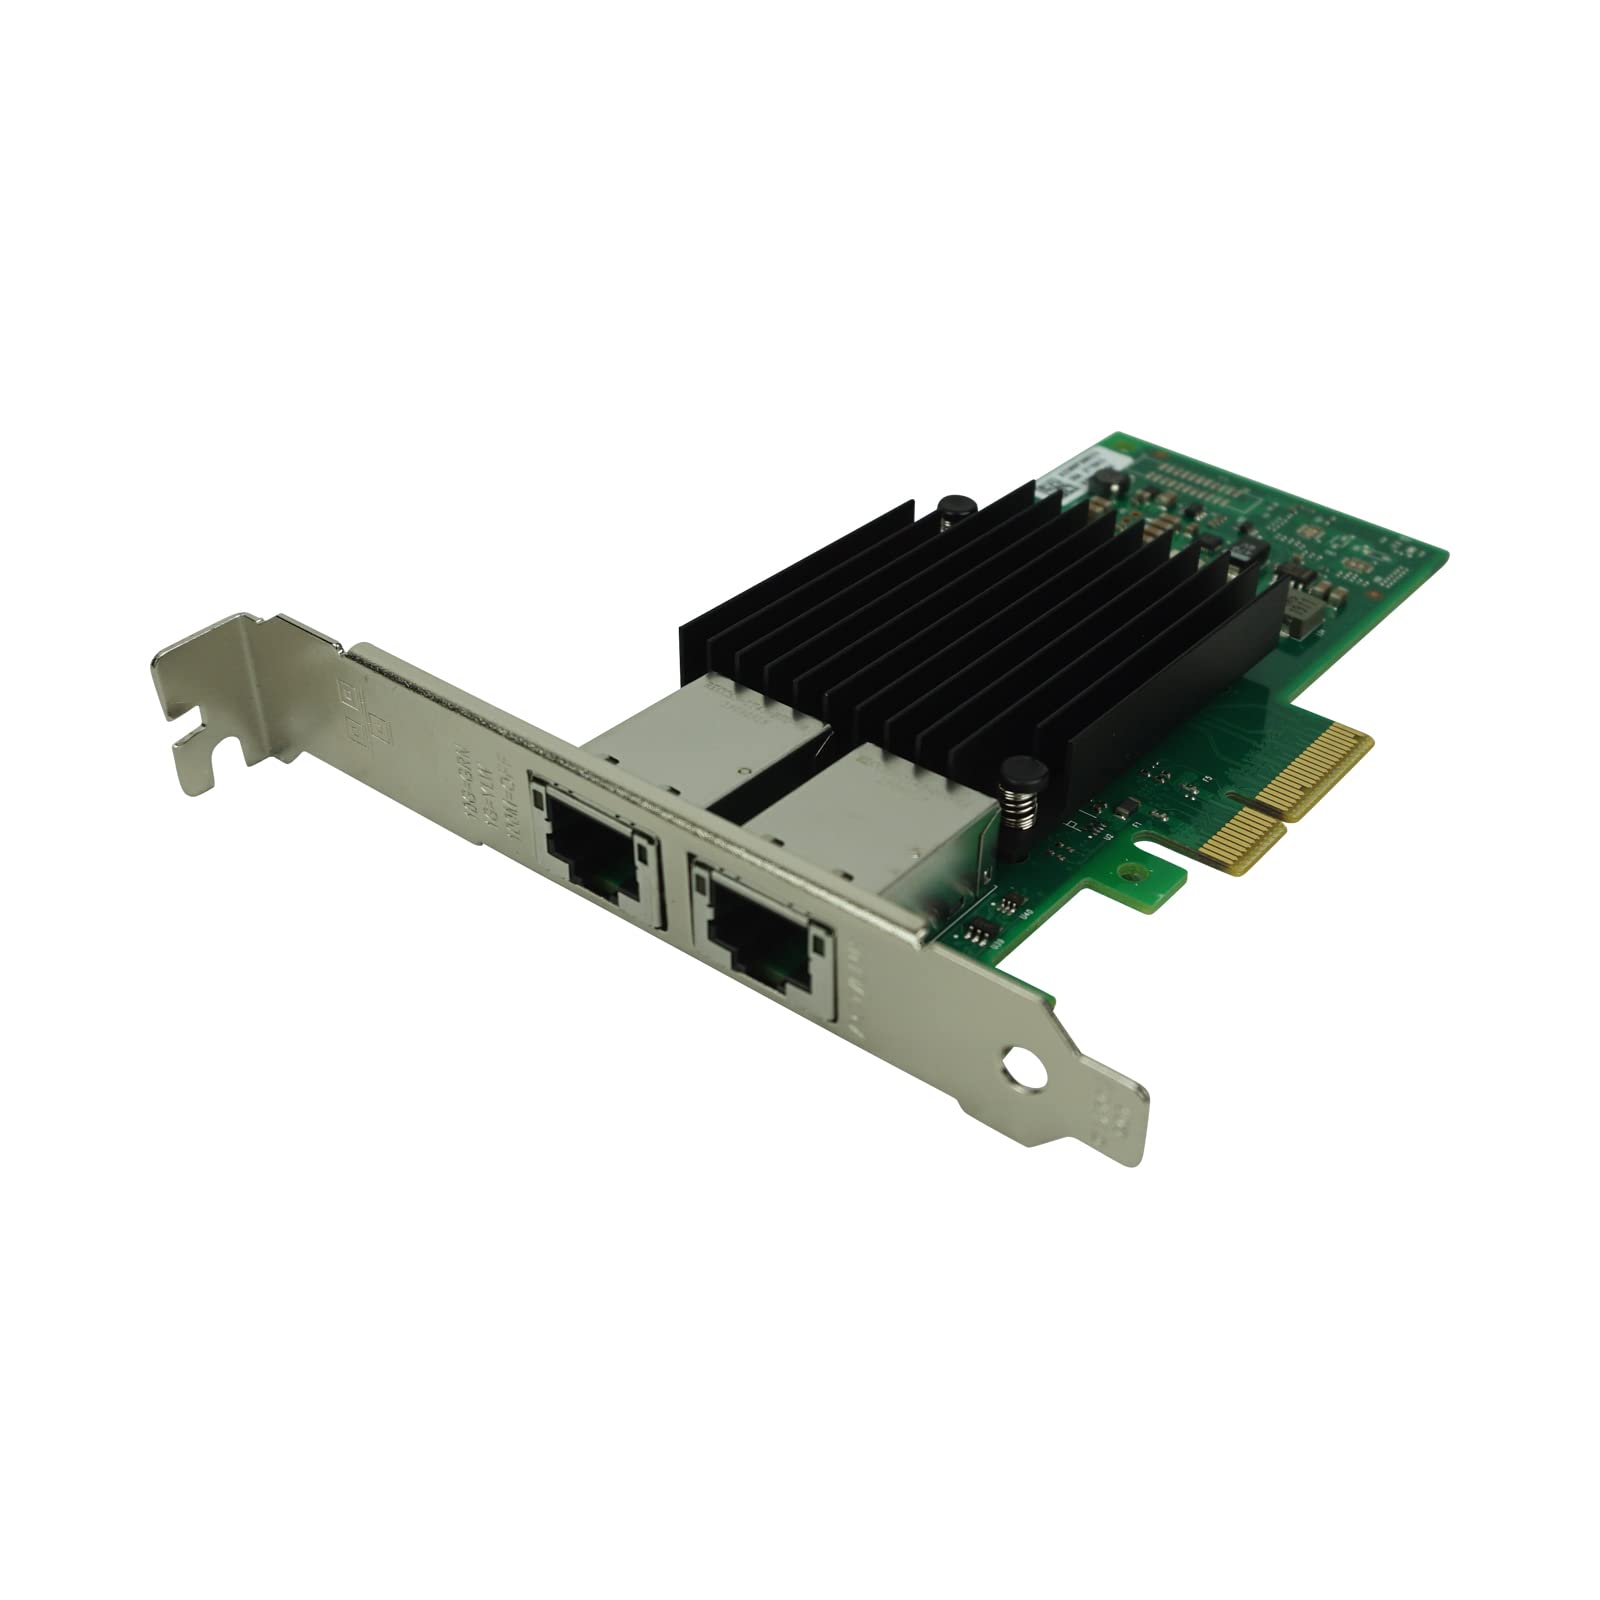 Intel Ethernet Converged Network Adapter X550-T2 - image 1 of 2